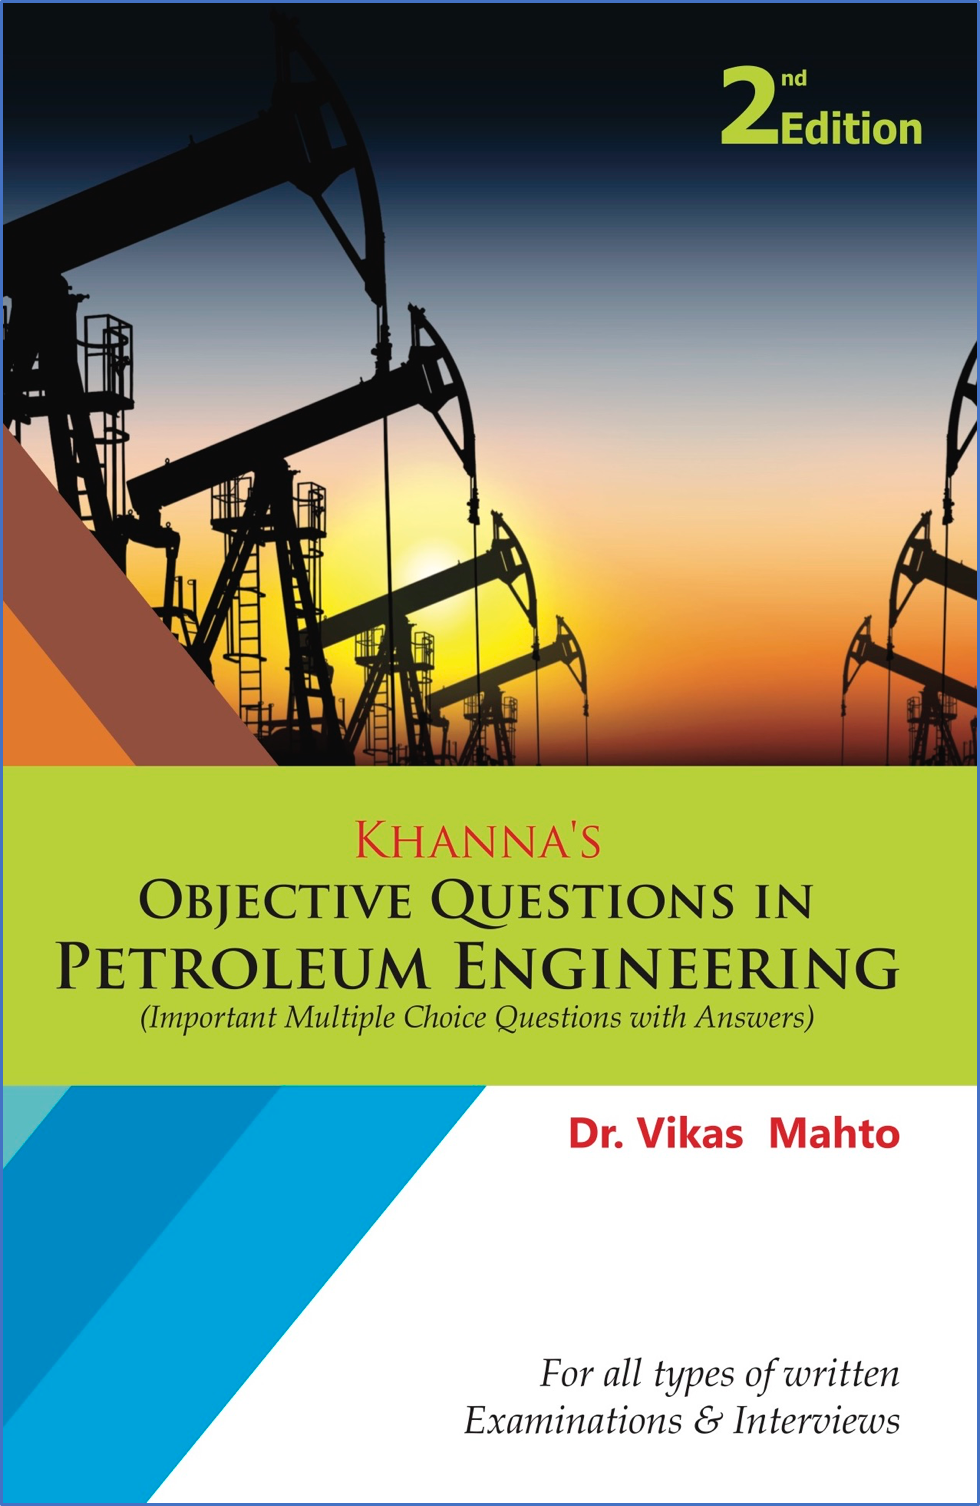 Khanna's Objective Questions in Petroleum Engineering